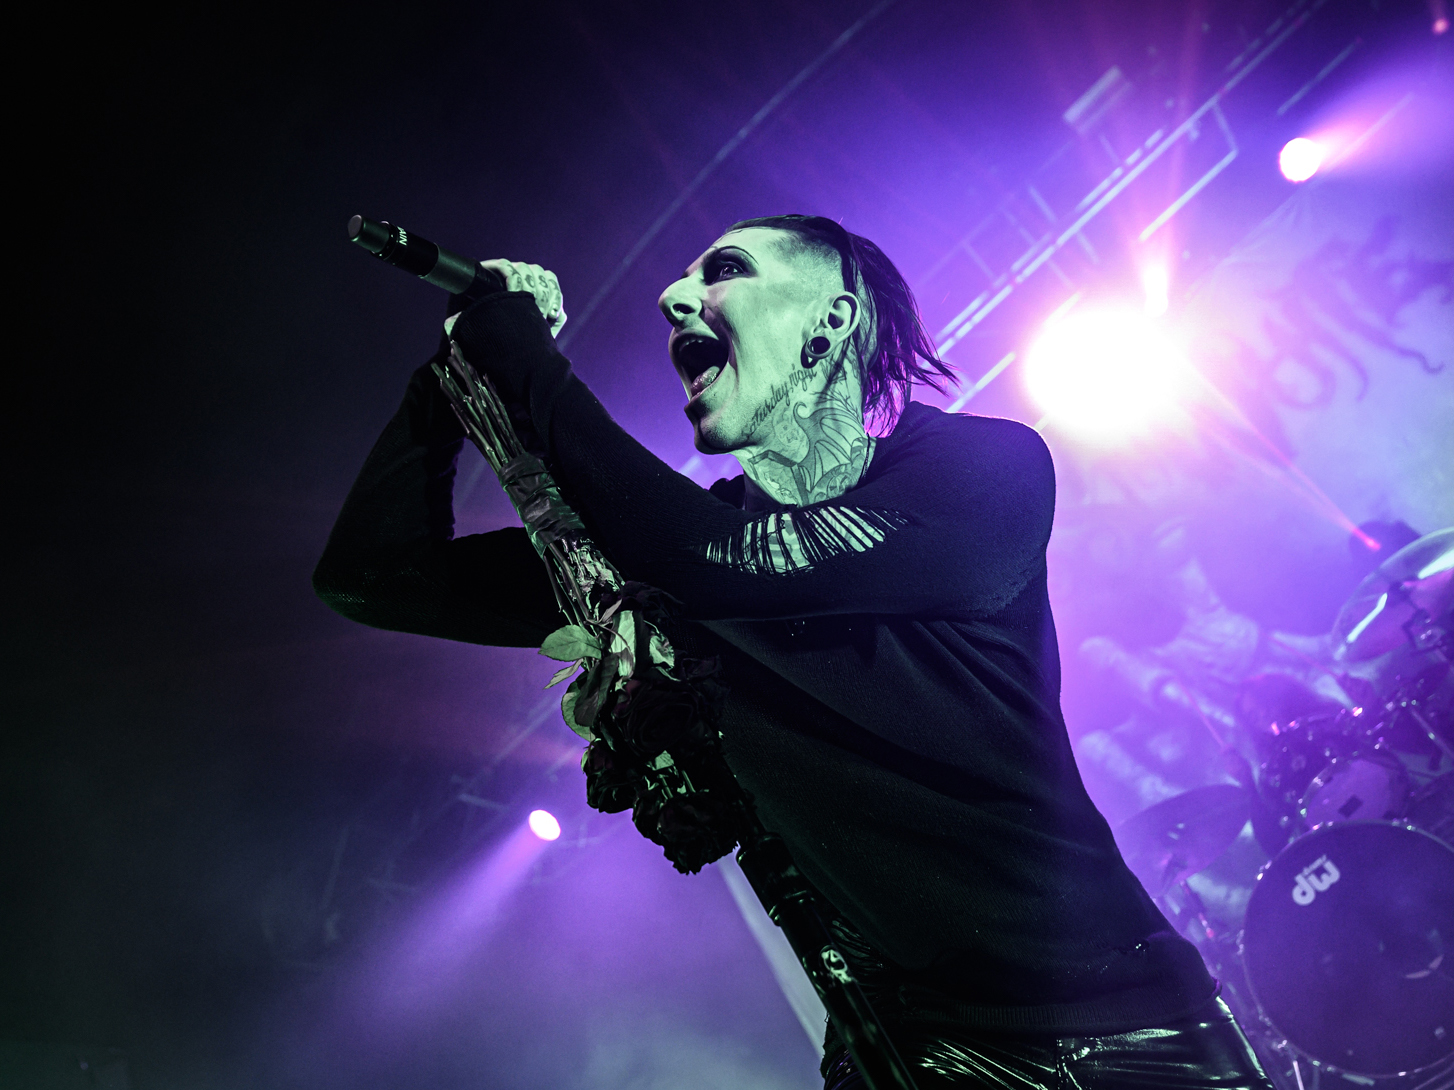 Motionless In White & In This Moment at Mesa Amphitheater